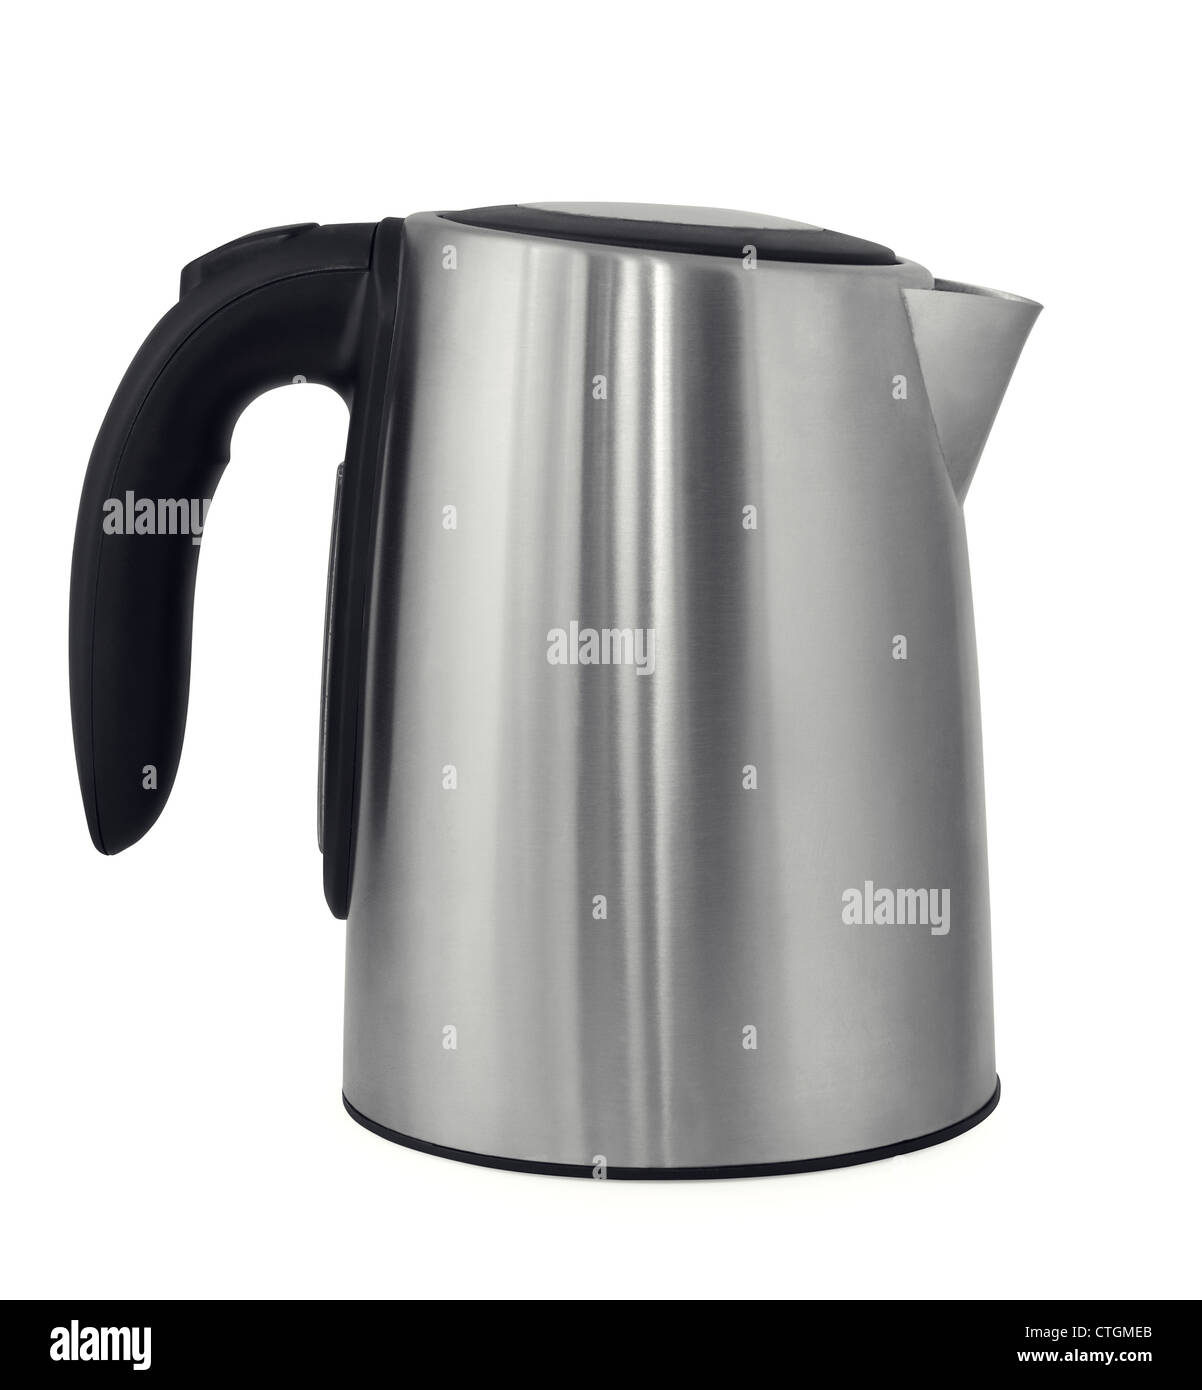 Stainless steel electric kettle isolated on white Stock Photo